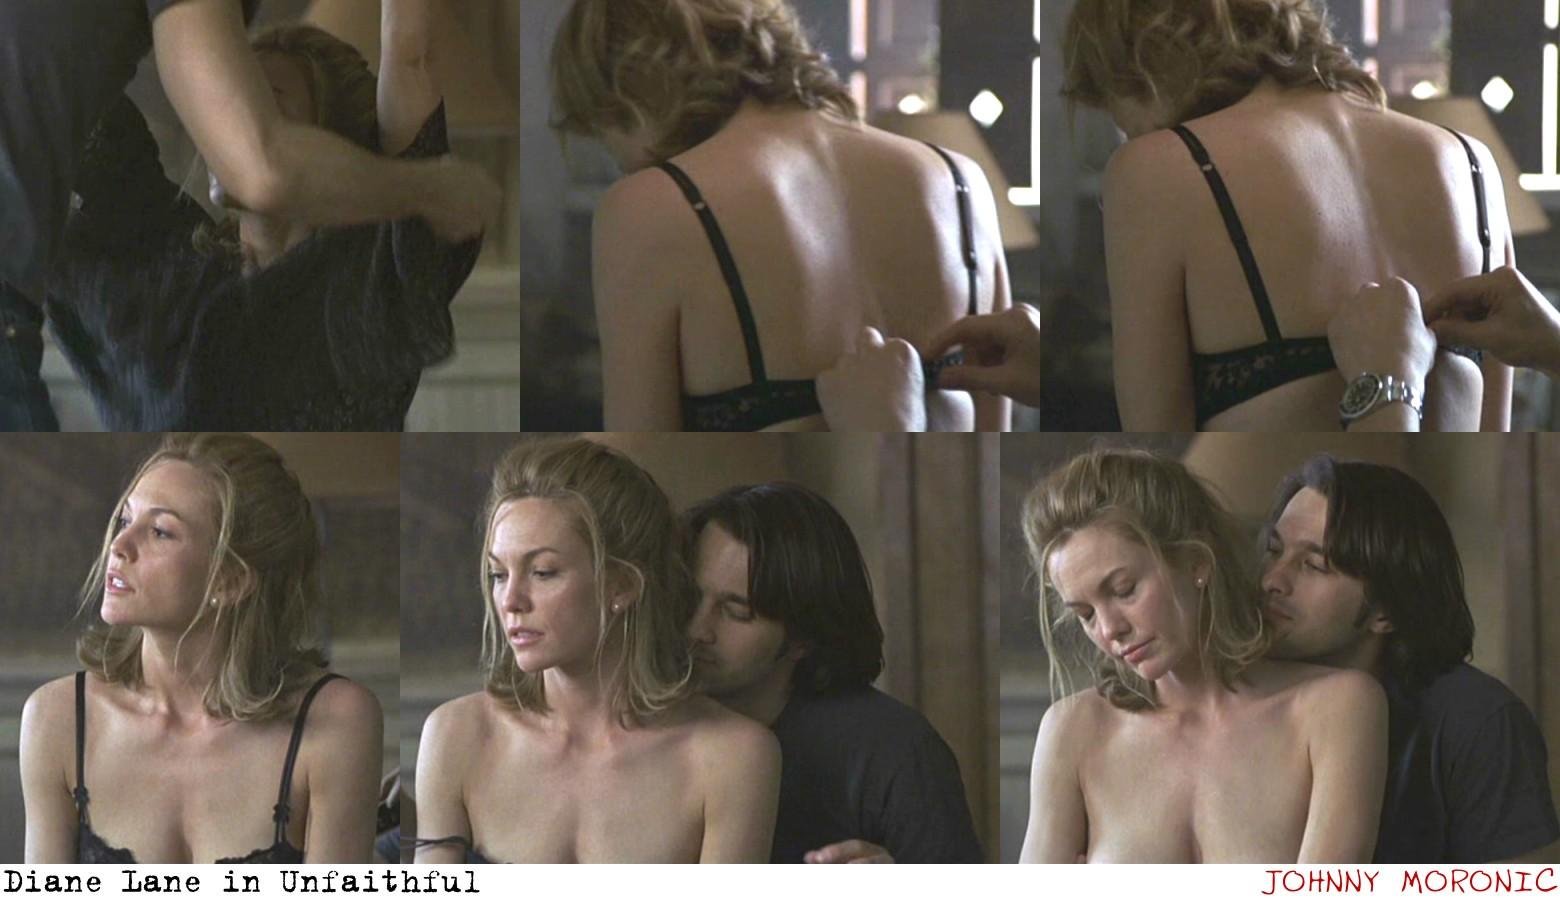 Diane lane nude video pic pic picture